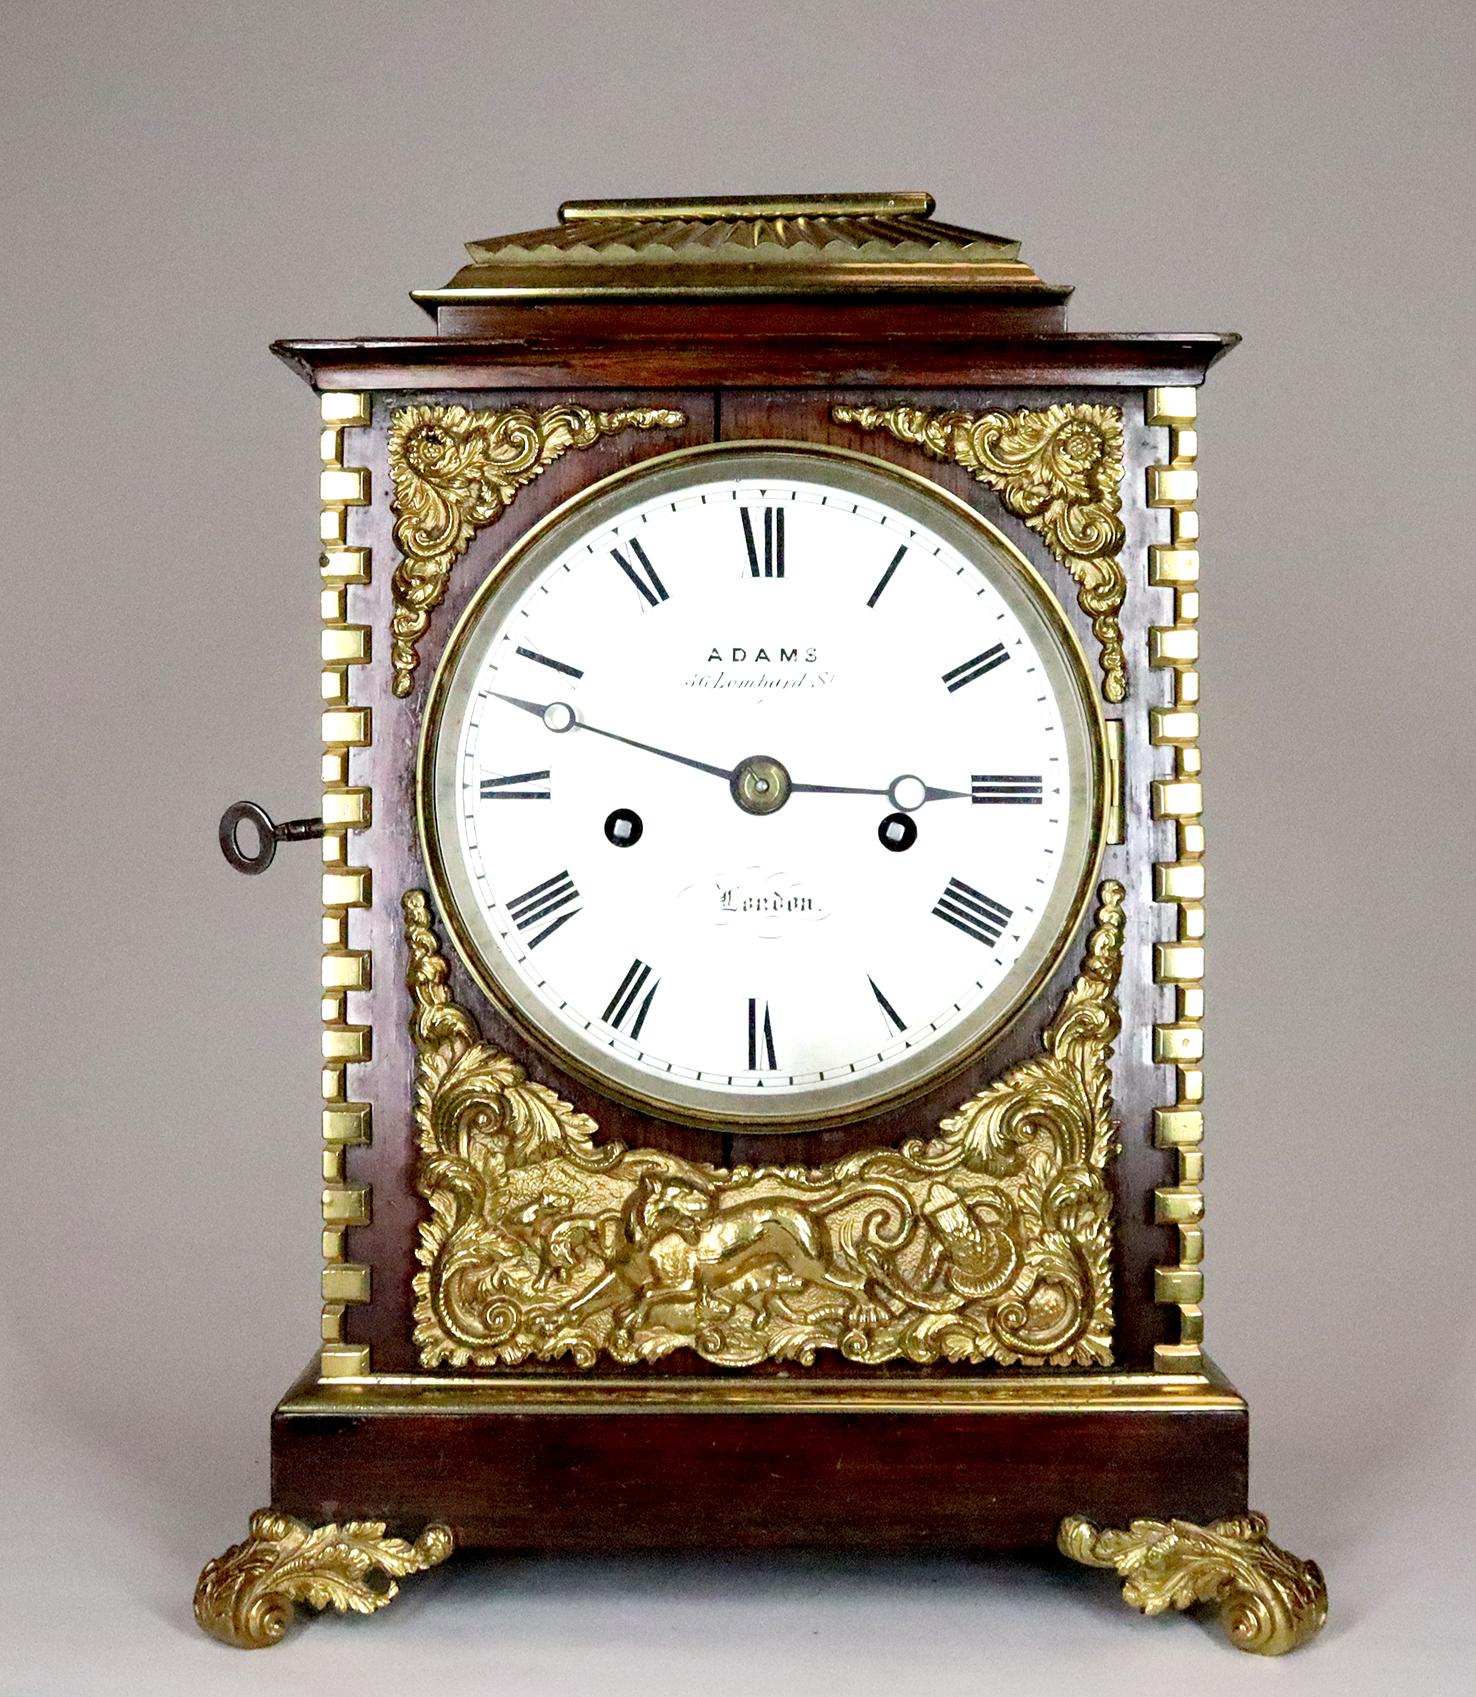 A rosewood and ormolu mounted bracket clock. With an eight day twin fusee movement, signed Adams of Lombard Street on the 5 inch silvered dial and movement back plate. Striking on a bell.

The case of this bracket clock has a delightful pergoda